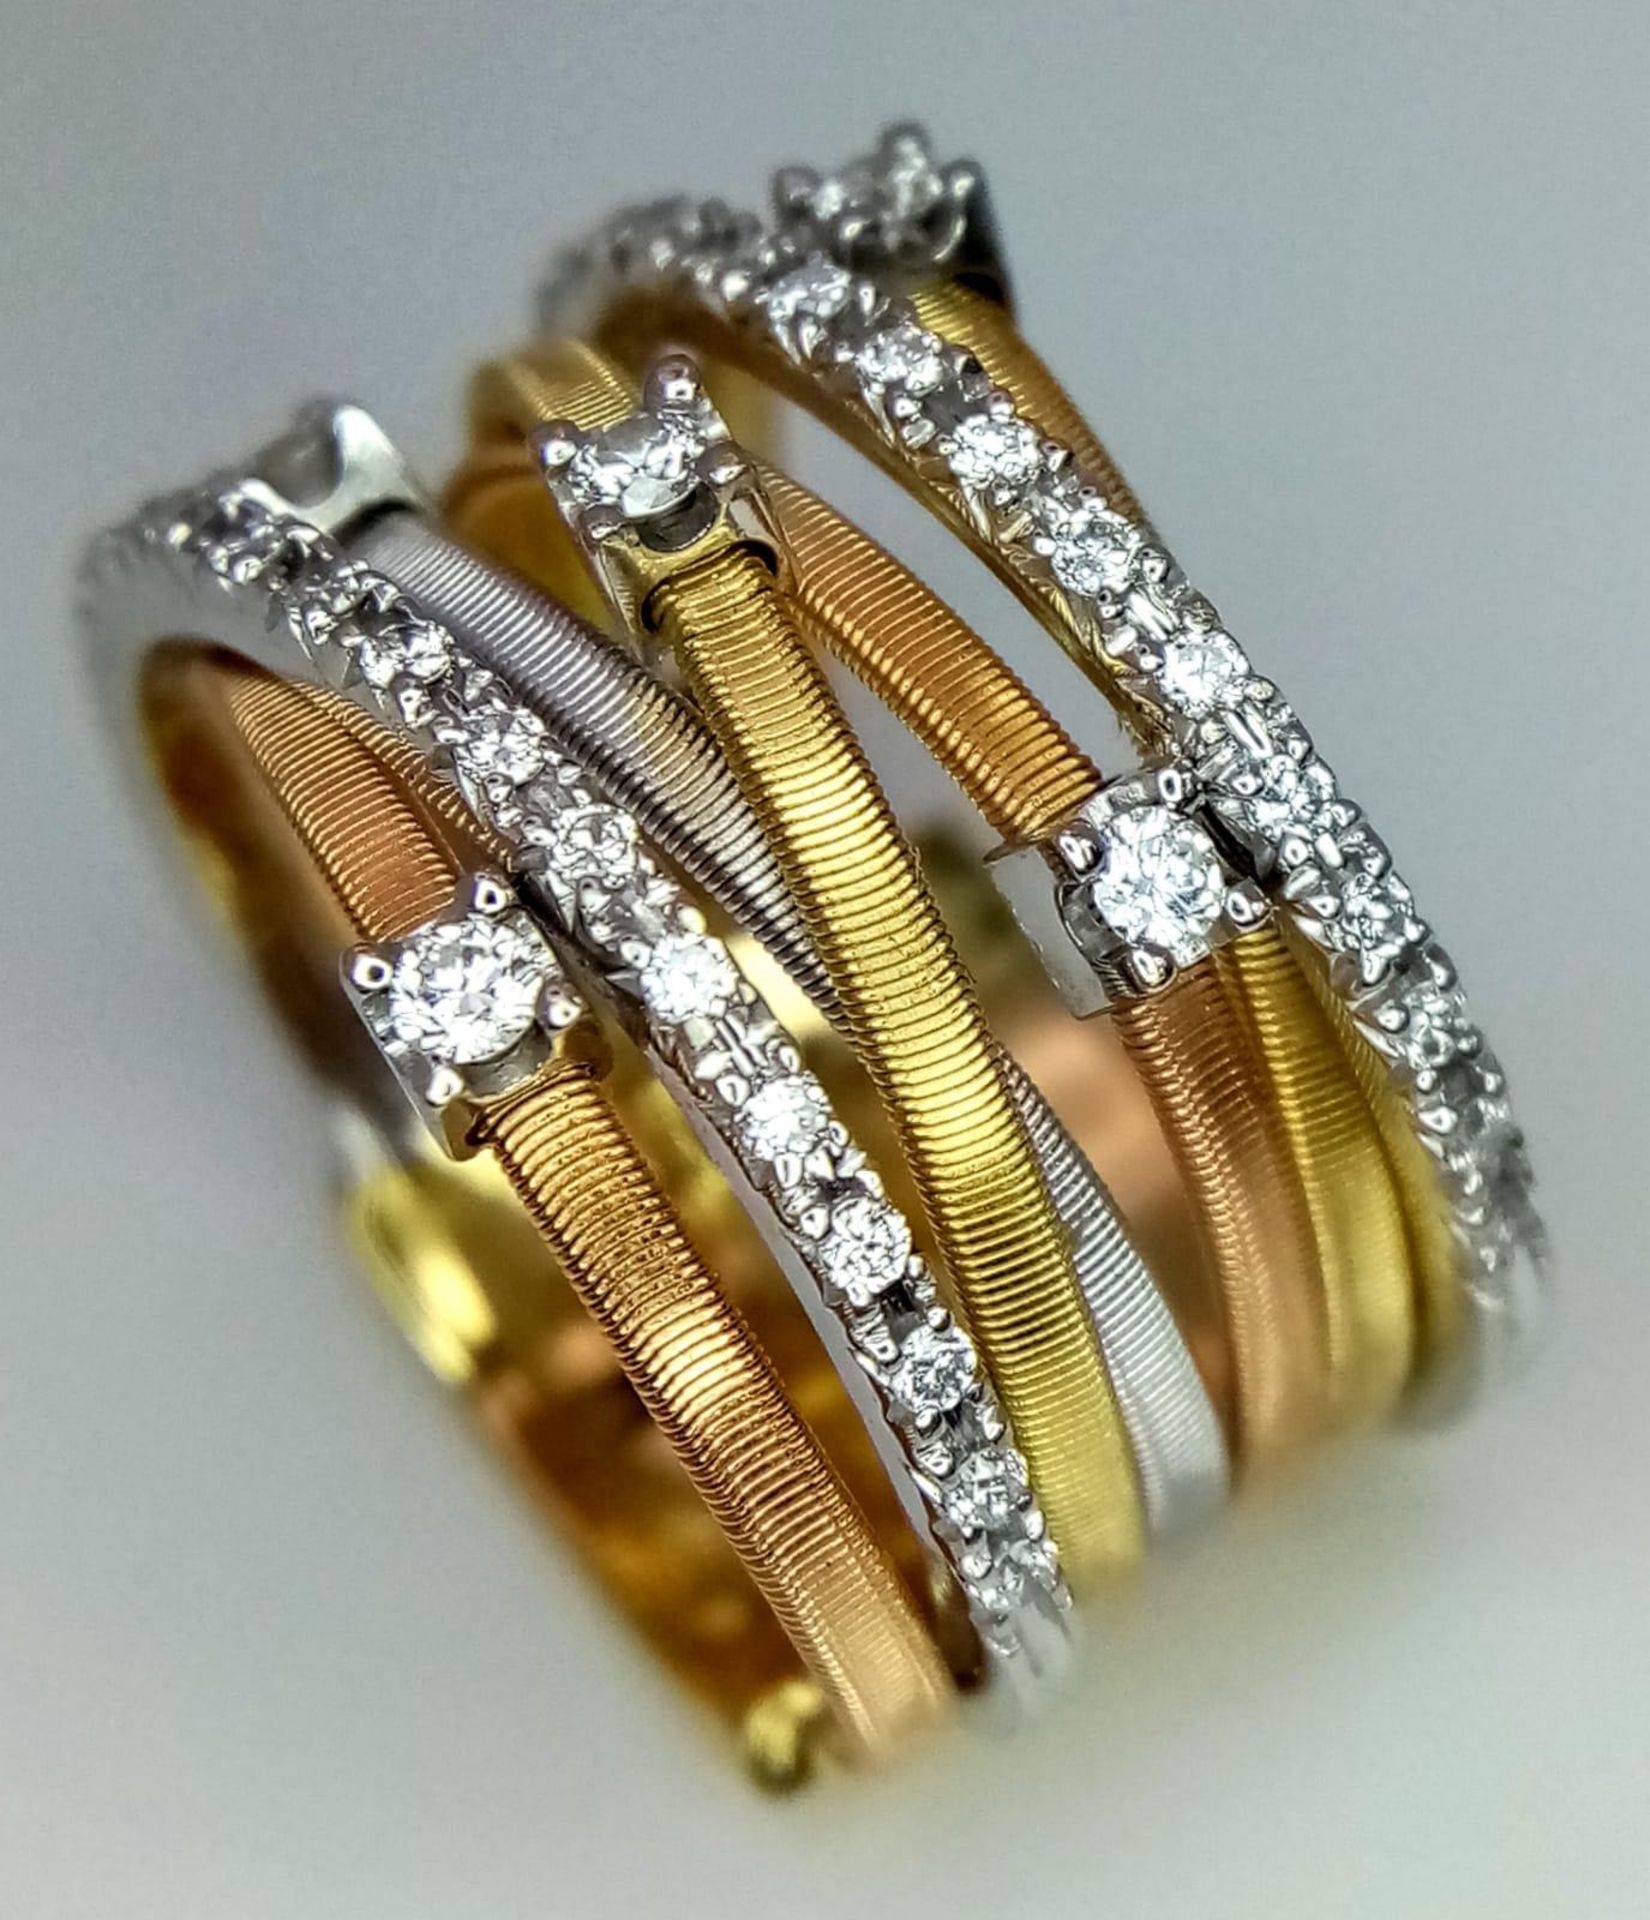 An Italian 18K Yellow and White Gold Diamond Orbital Ring. Front band of gold interspersed with